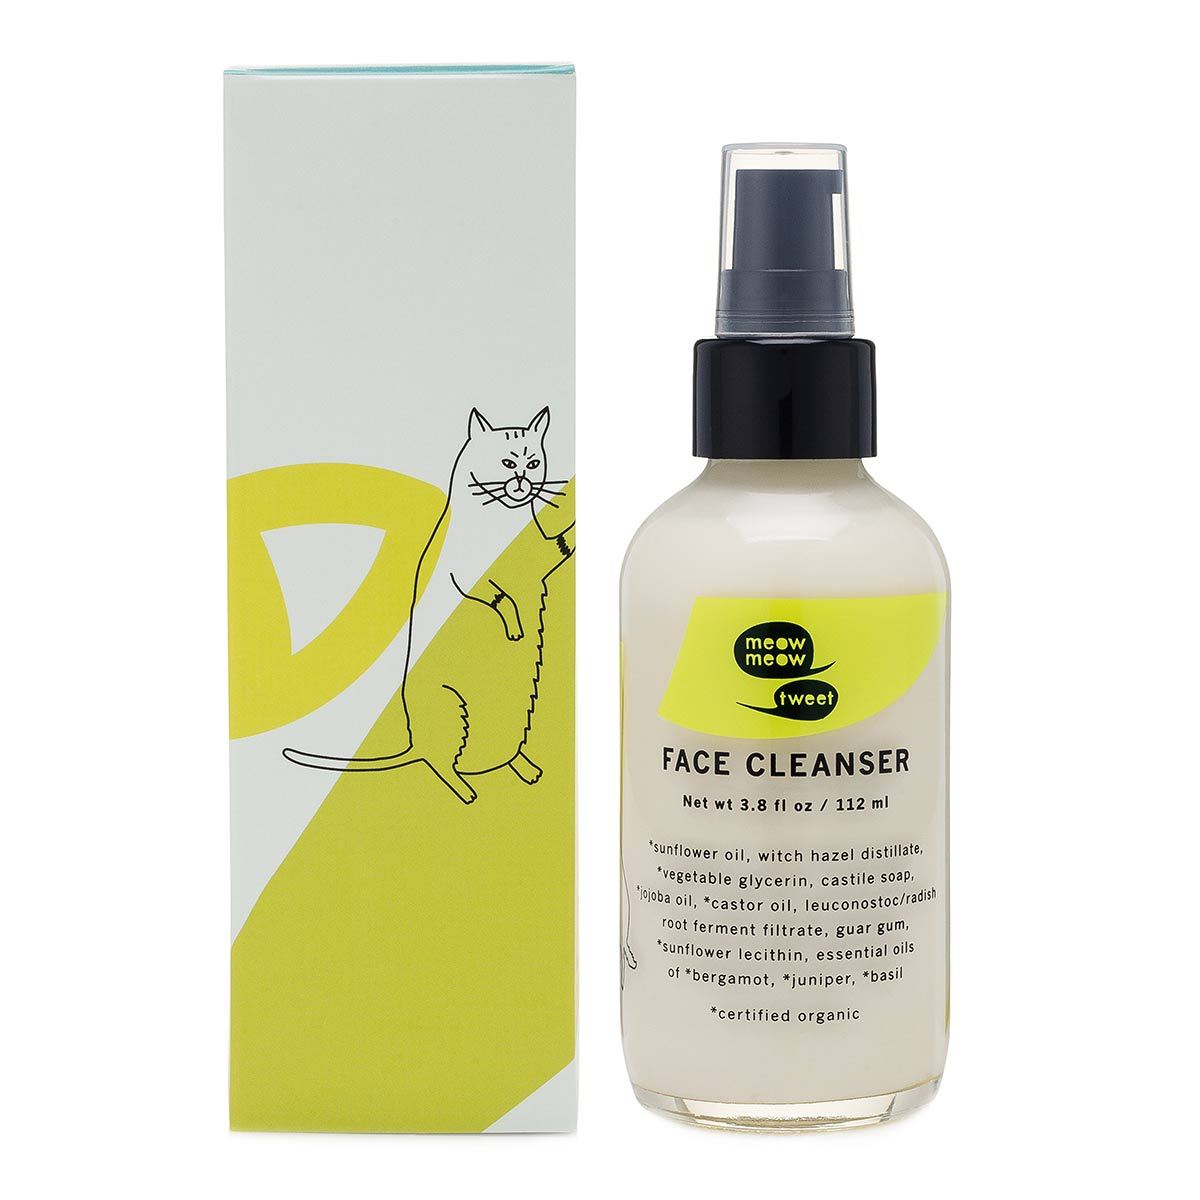 Primary image of Face Cleanser